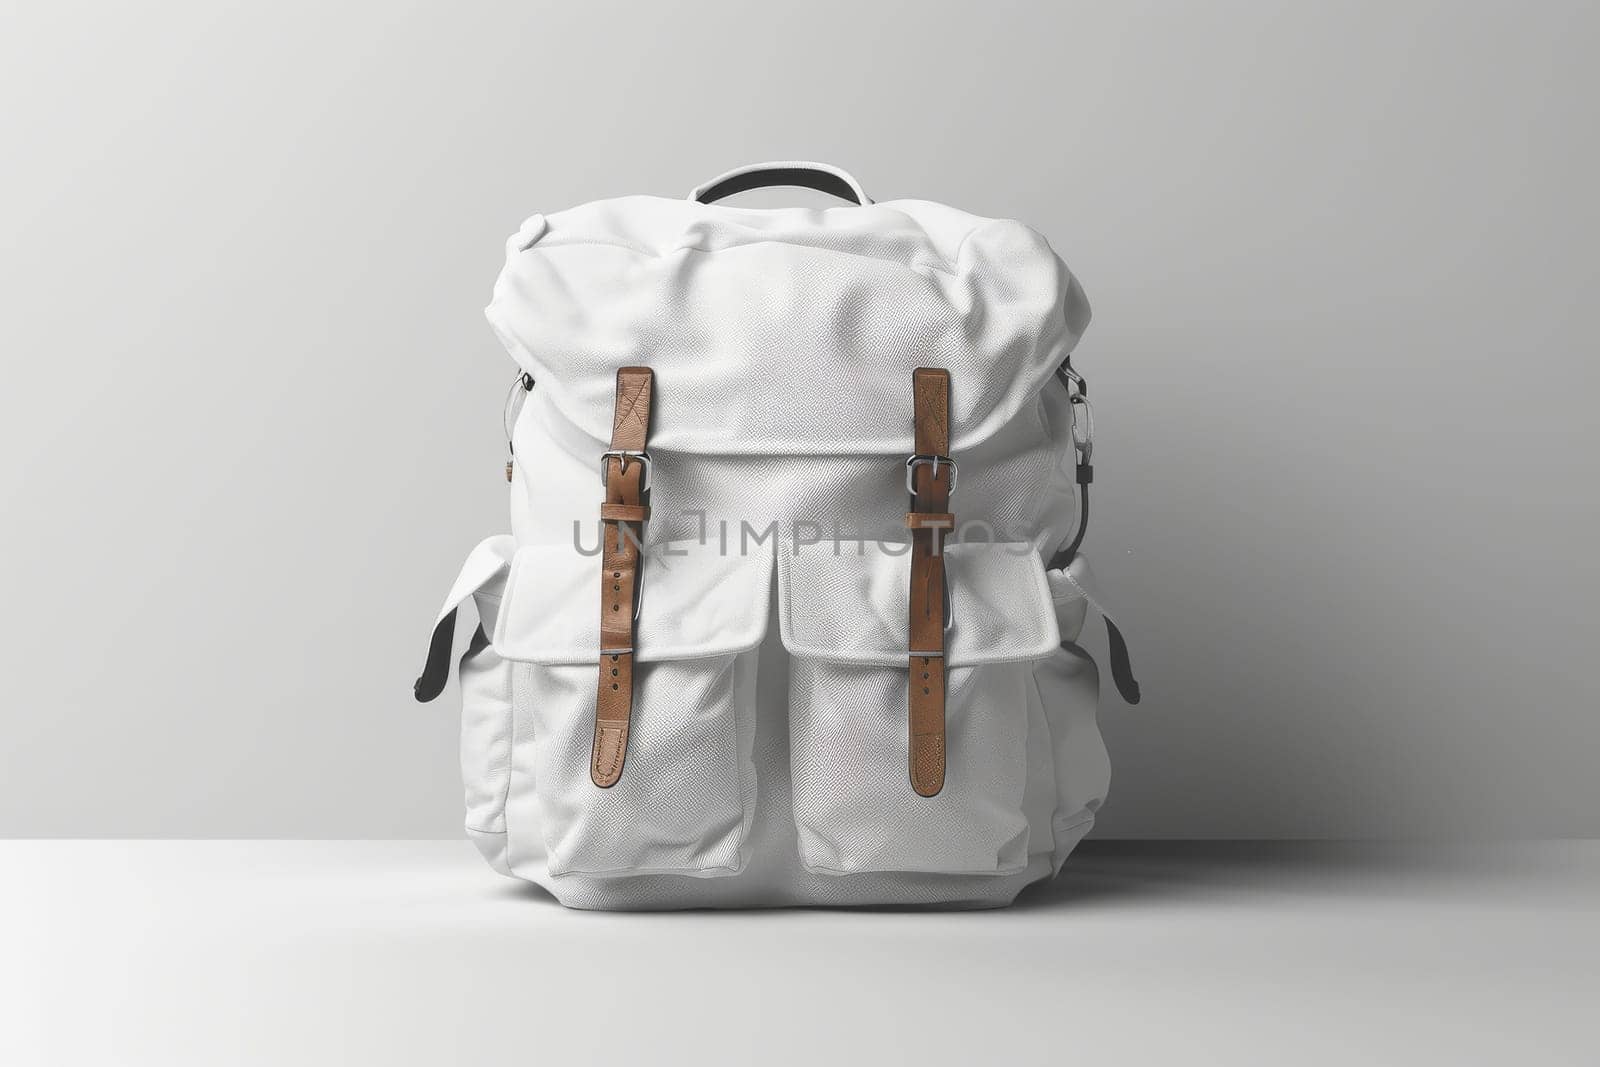 A white backpack with brown straps and a brown buckle. The straps are made of leather and the buckle is made of metal